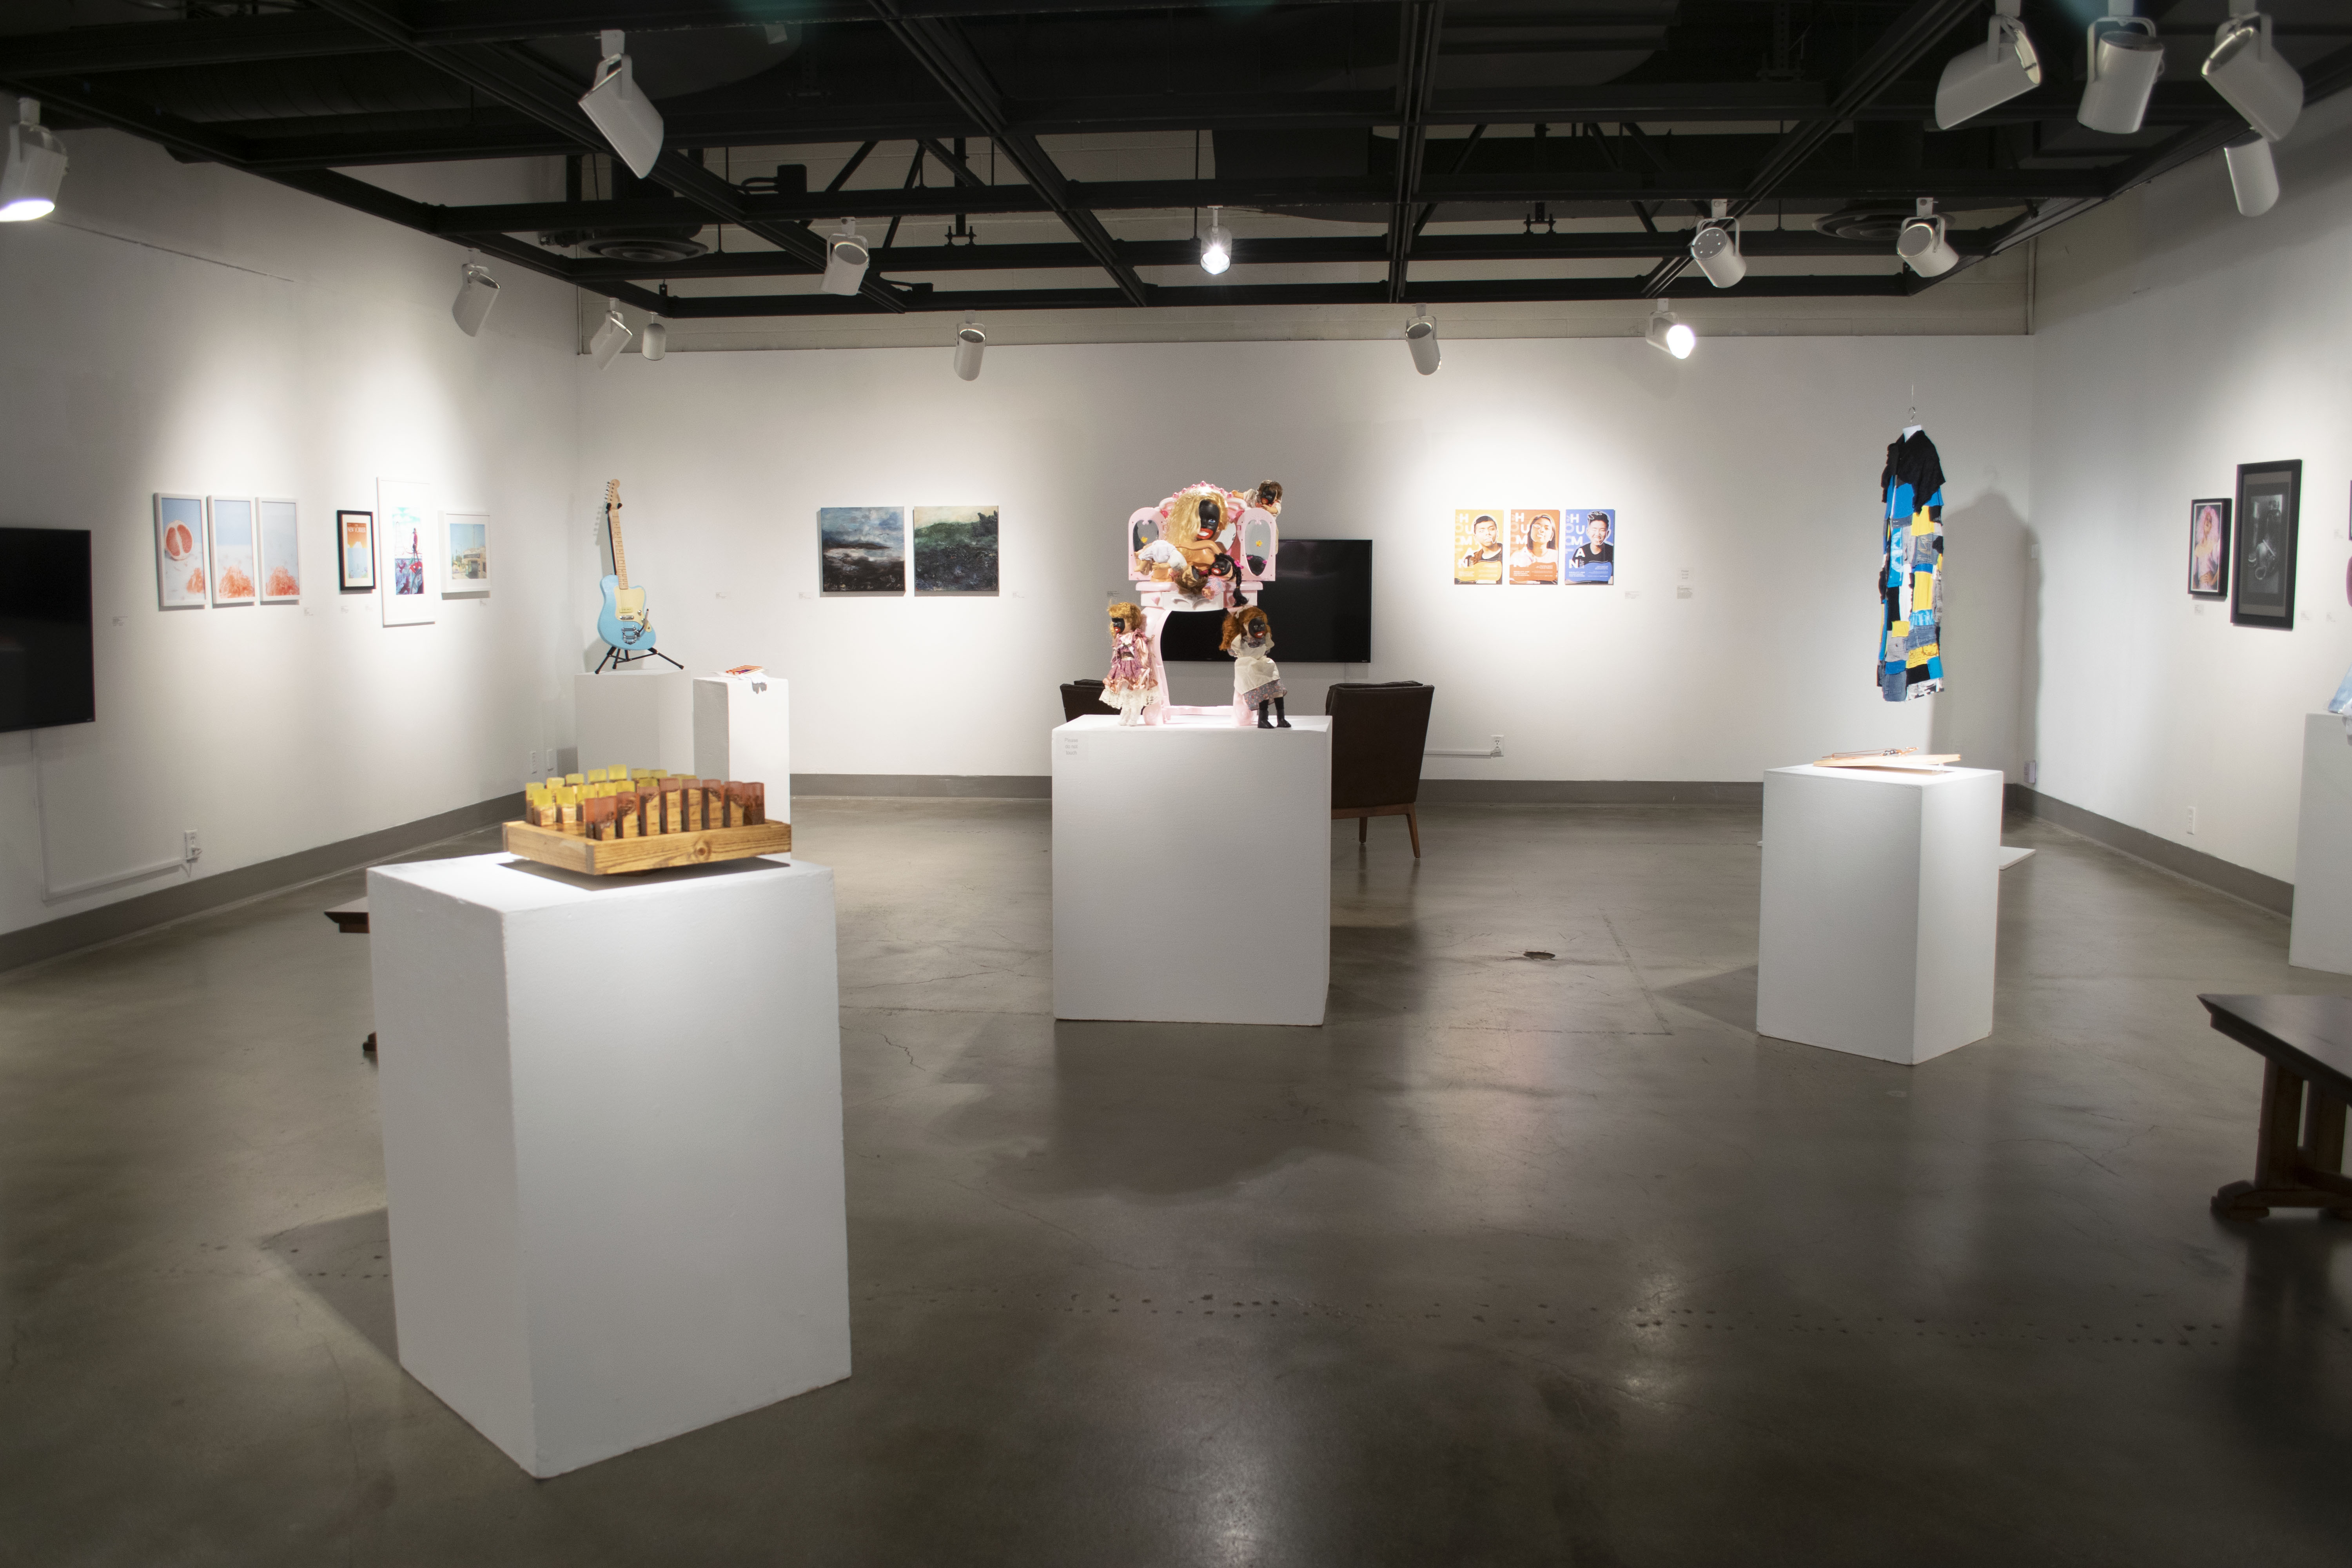 Back of gallery, Exhibition: PolyKroma 2019, Apr. 27, 2019 to May 19, 2019, Co-curated by Michele Cairella Fillmore & Sooyun Im, W. Keith & Janet Kellogg Art Gallery, Cal Poly Pomona.